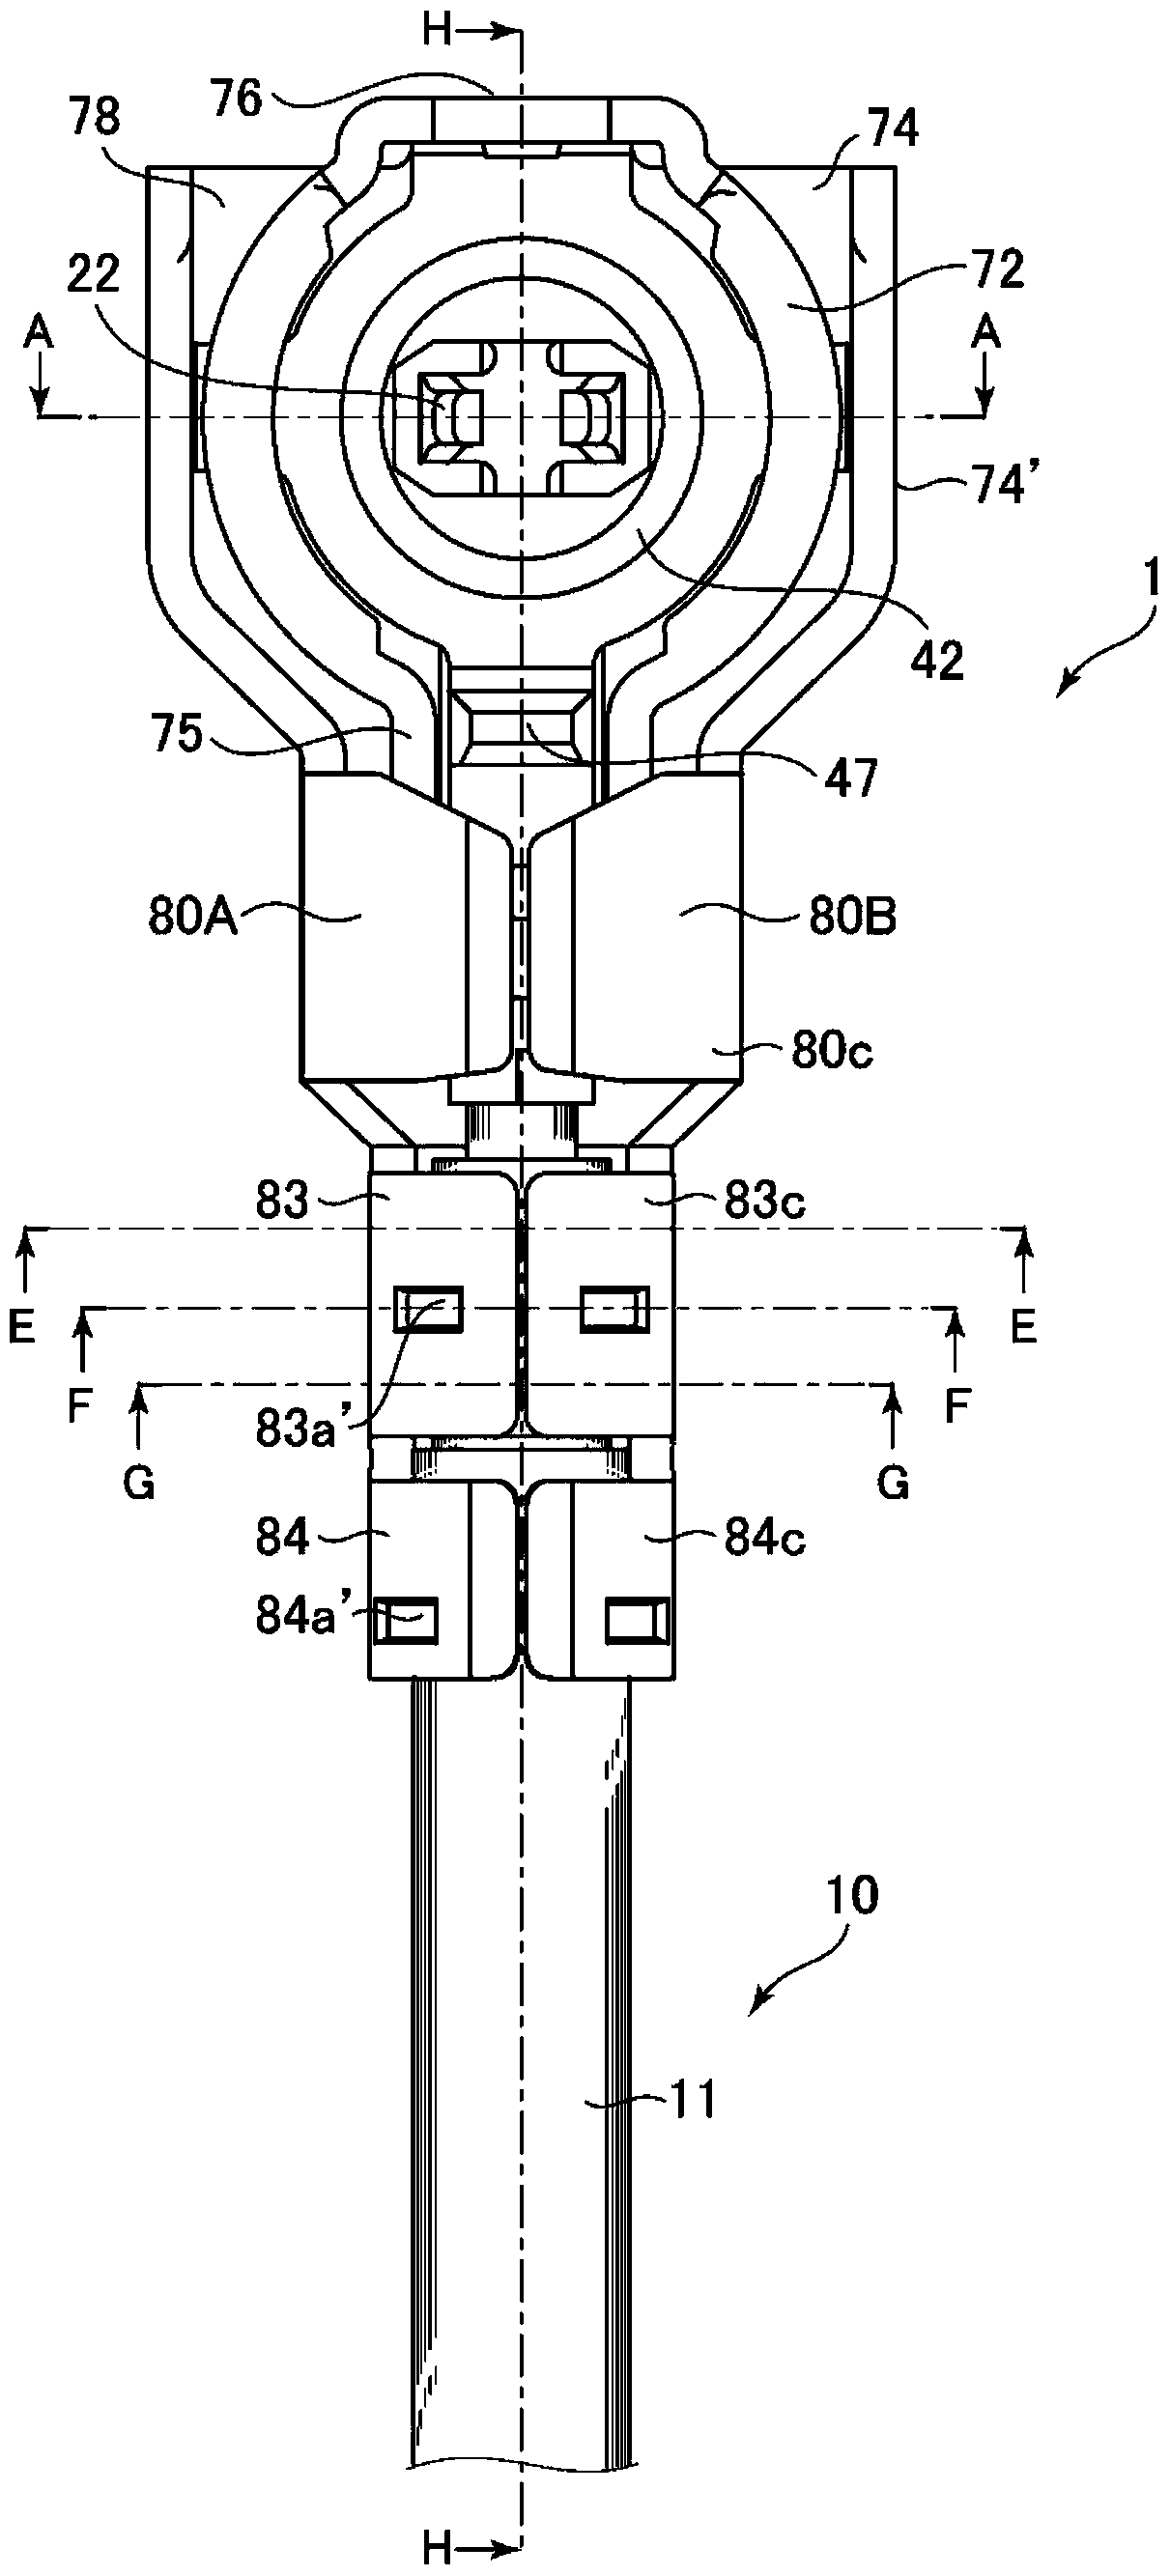 Coaxial Cable Connectors with Improved Crimp Strength and Impedance Performance